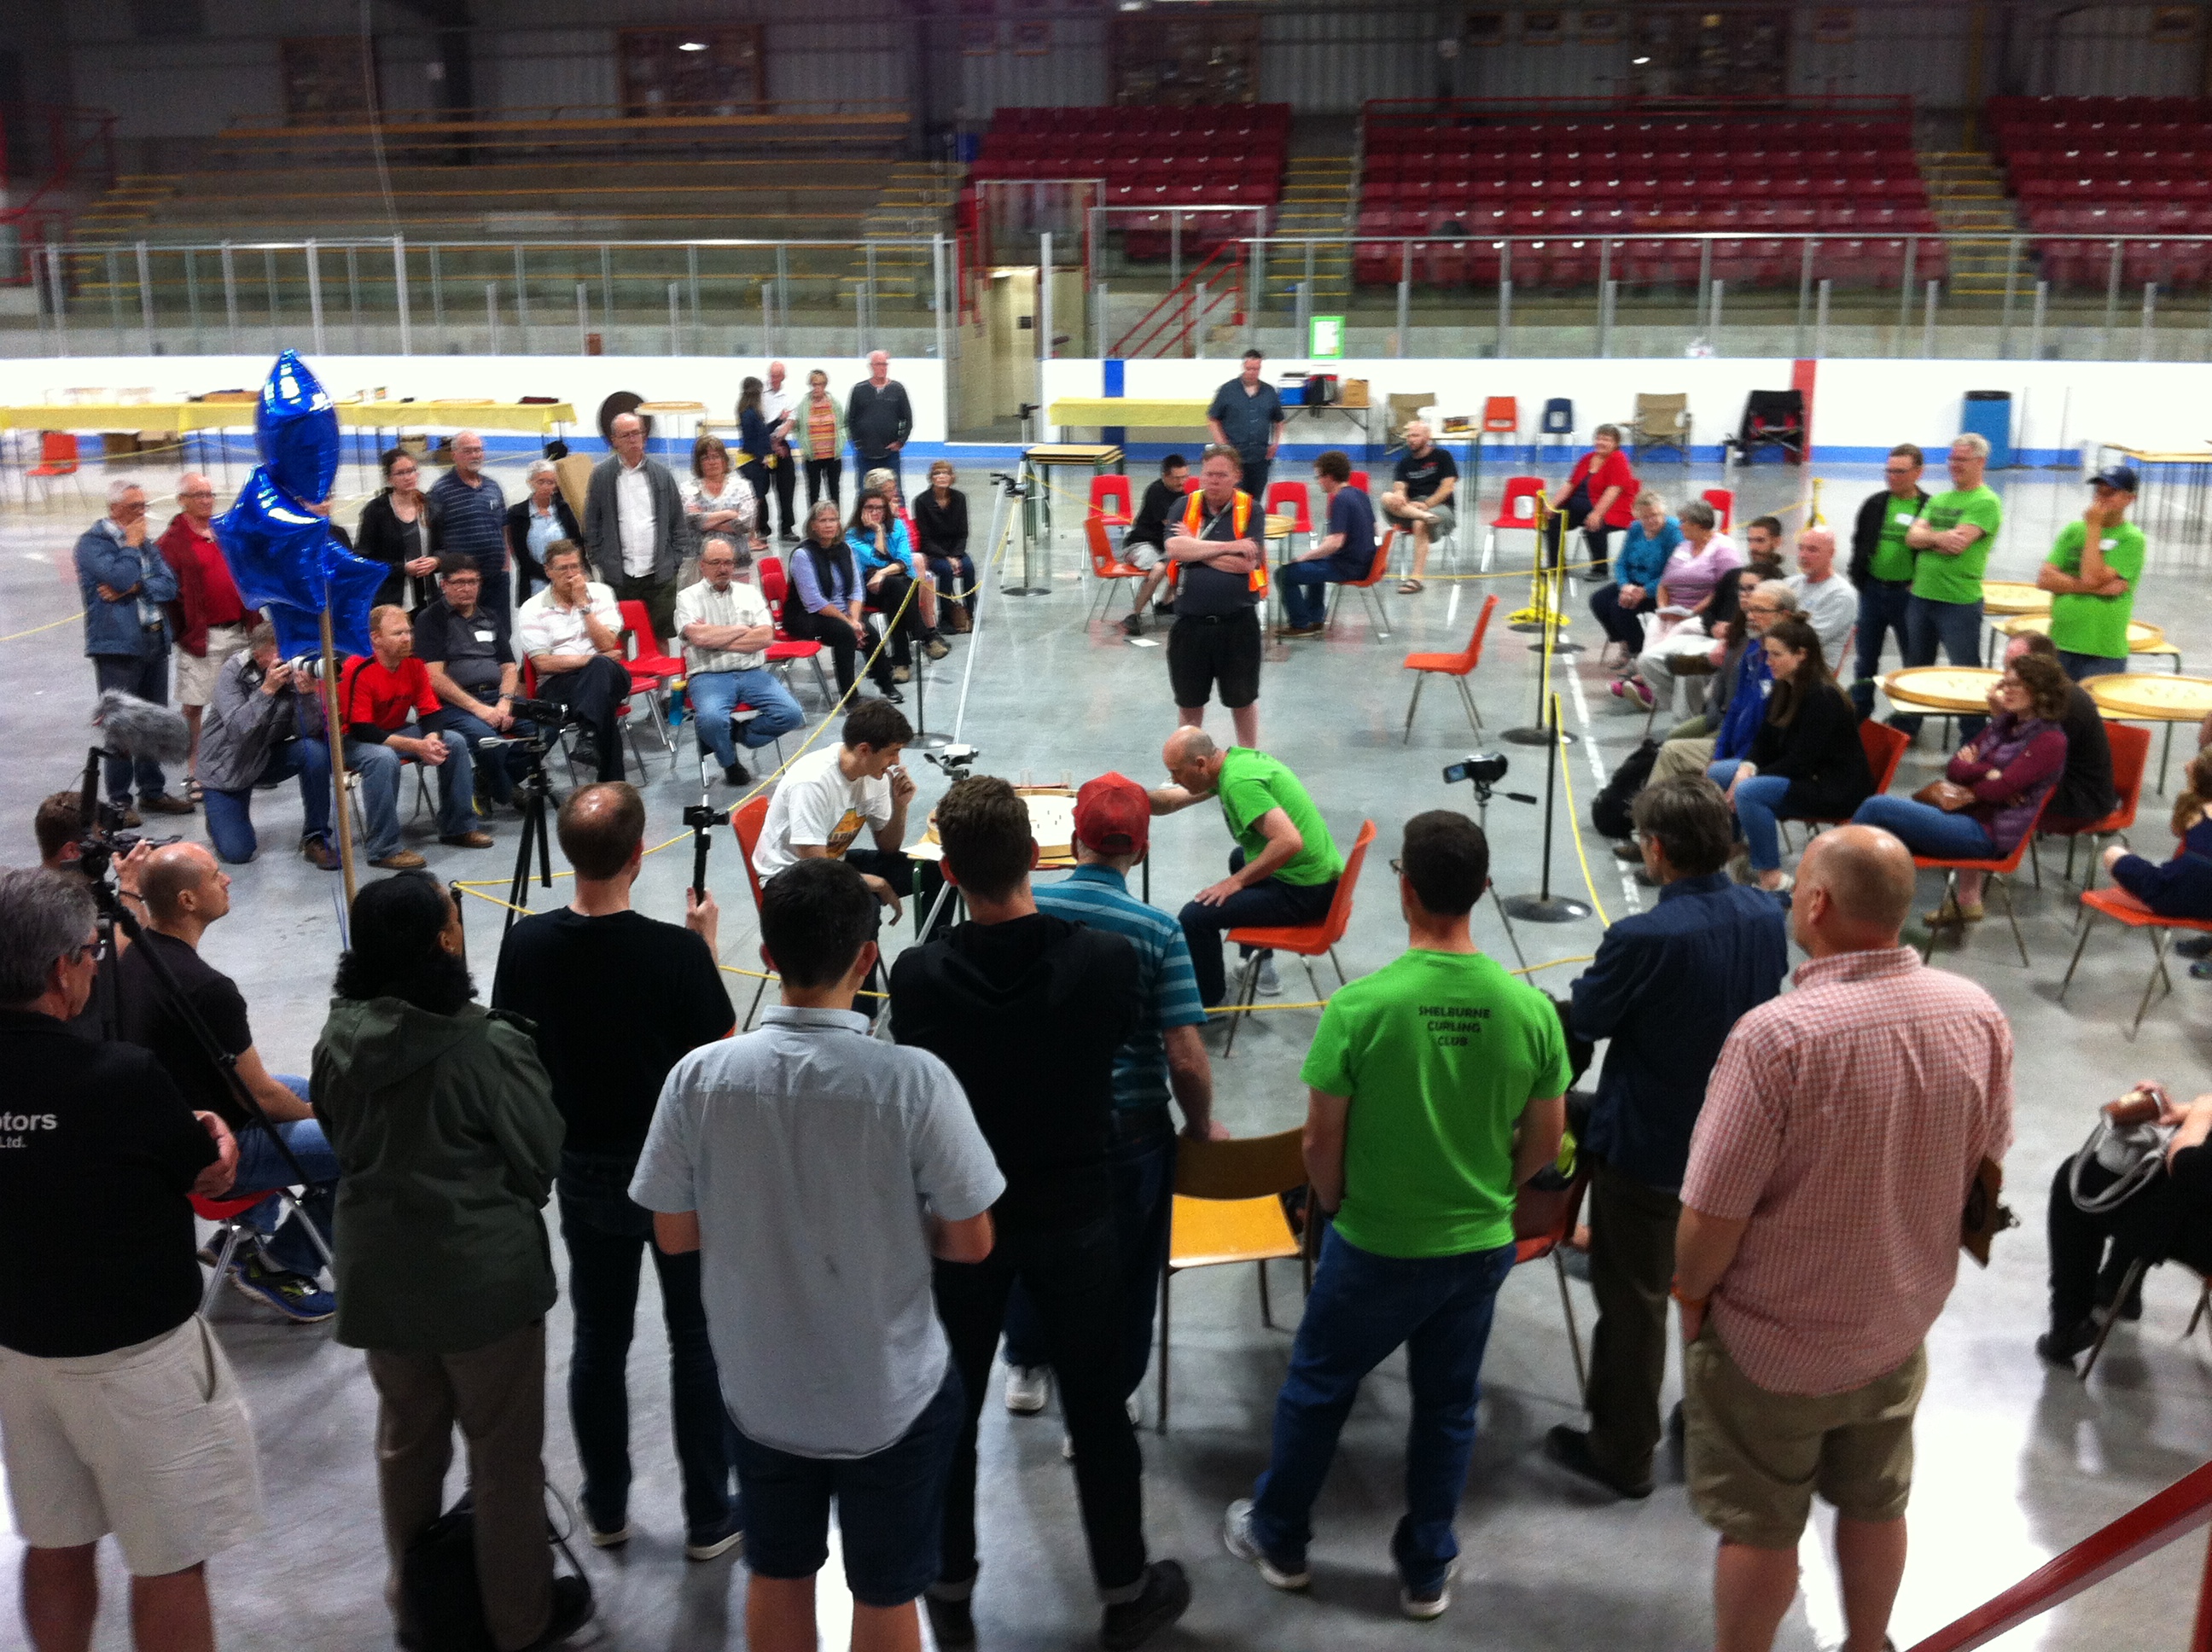 Spectators circle the board as the championship match is underway